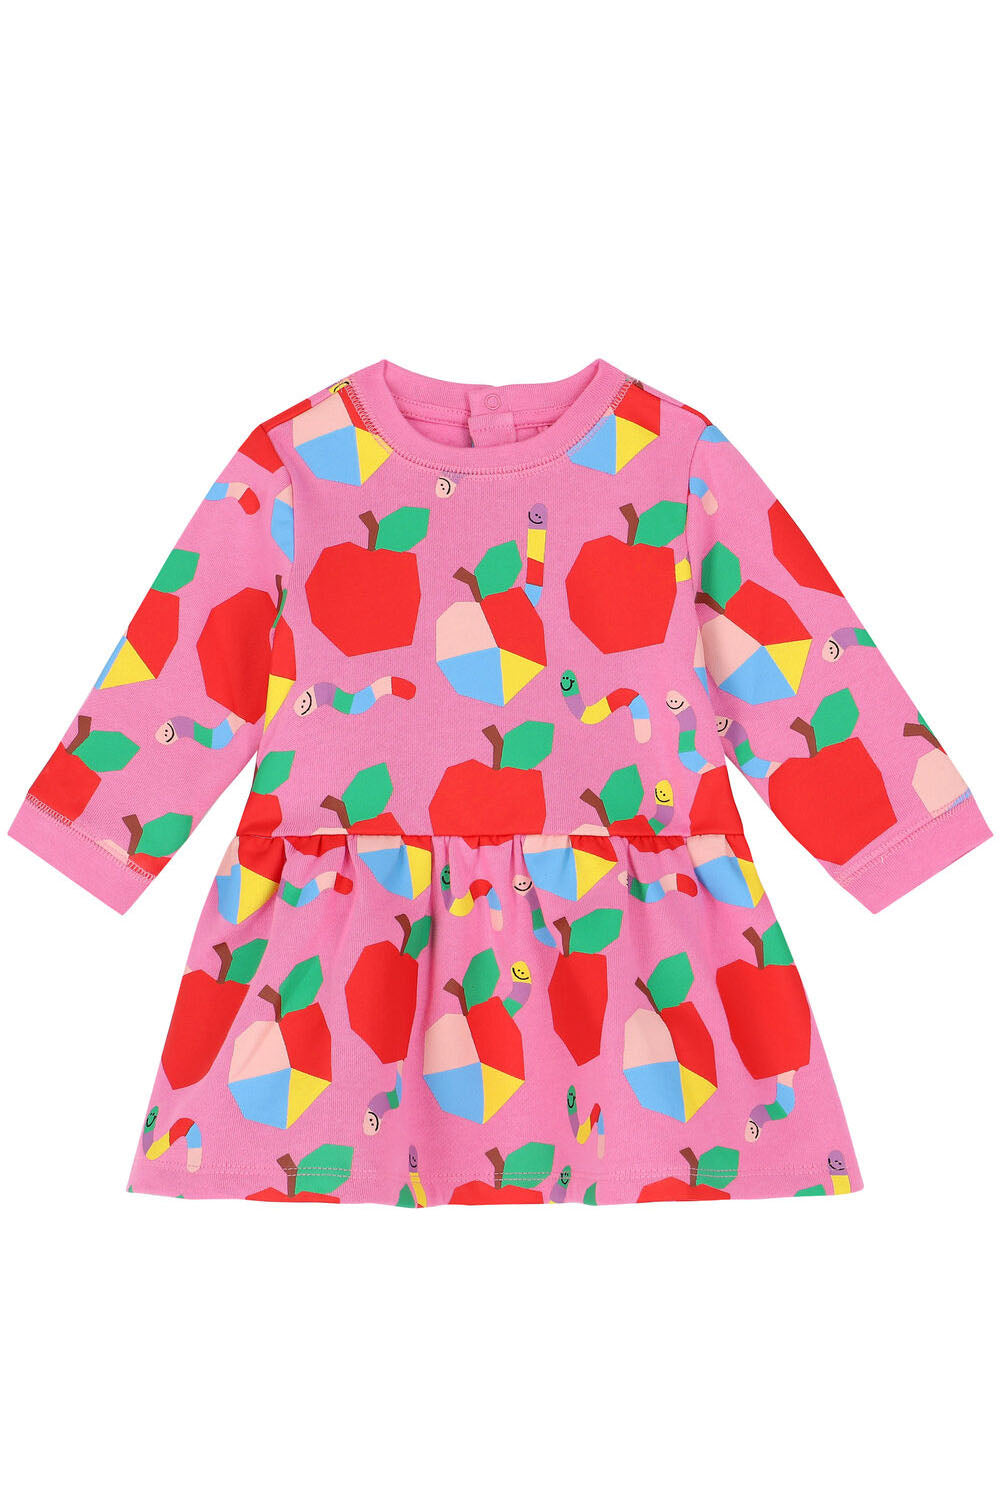 Baby Apples & Worms Dress - Maison7